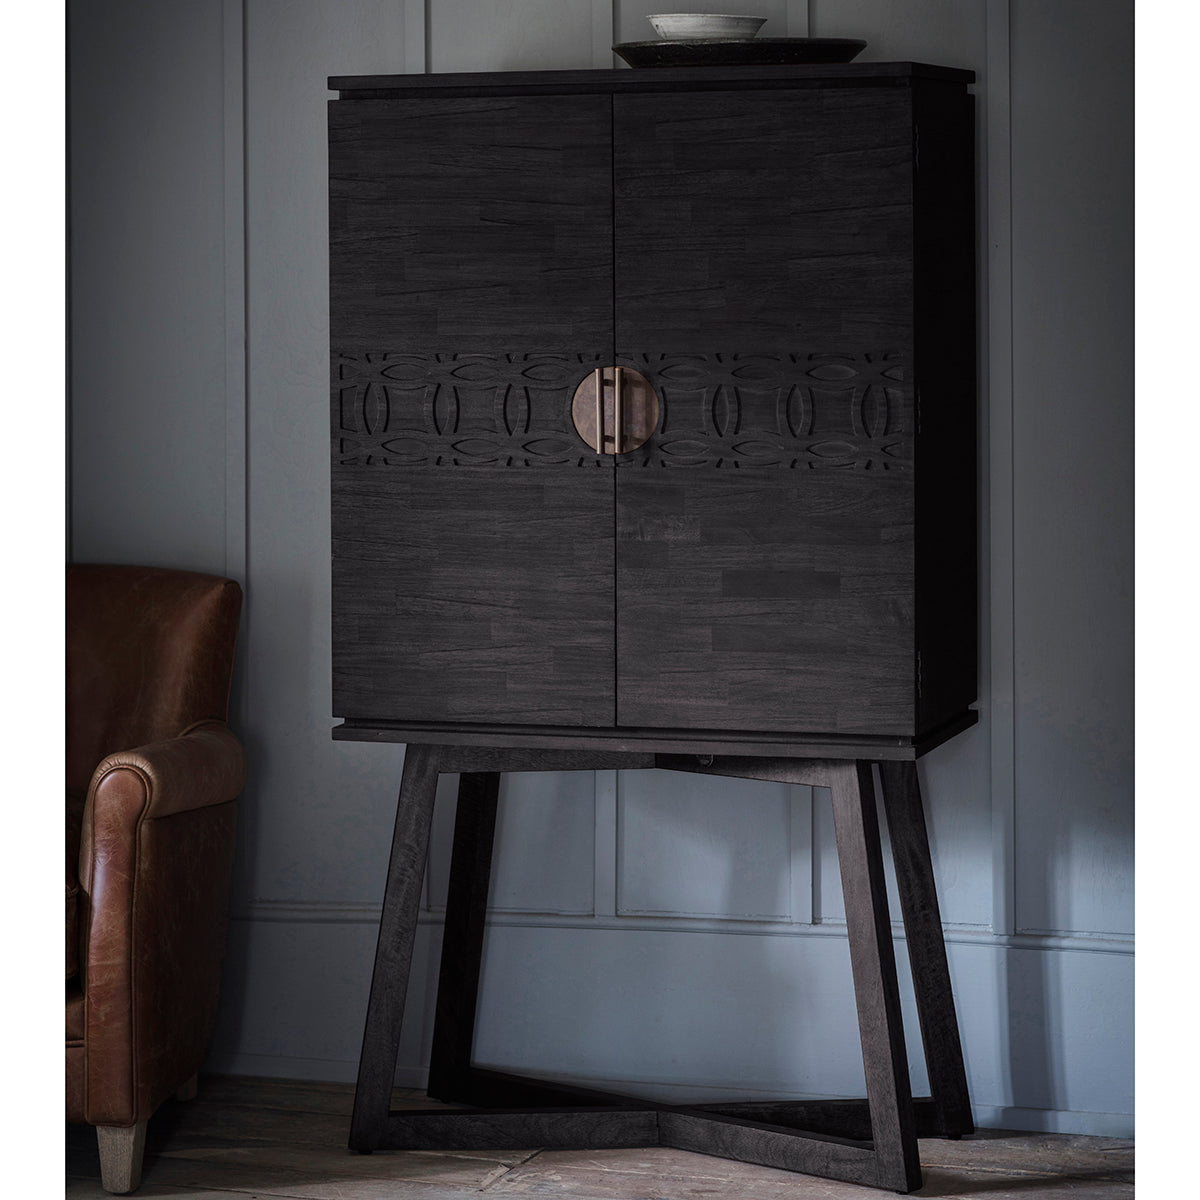 A Dartington Boutique Cocktail Cabinet on a wooden stand in a room, perfect for home furniture and interior decor.